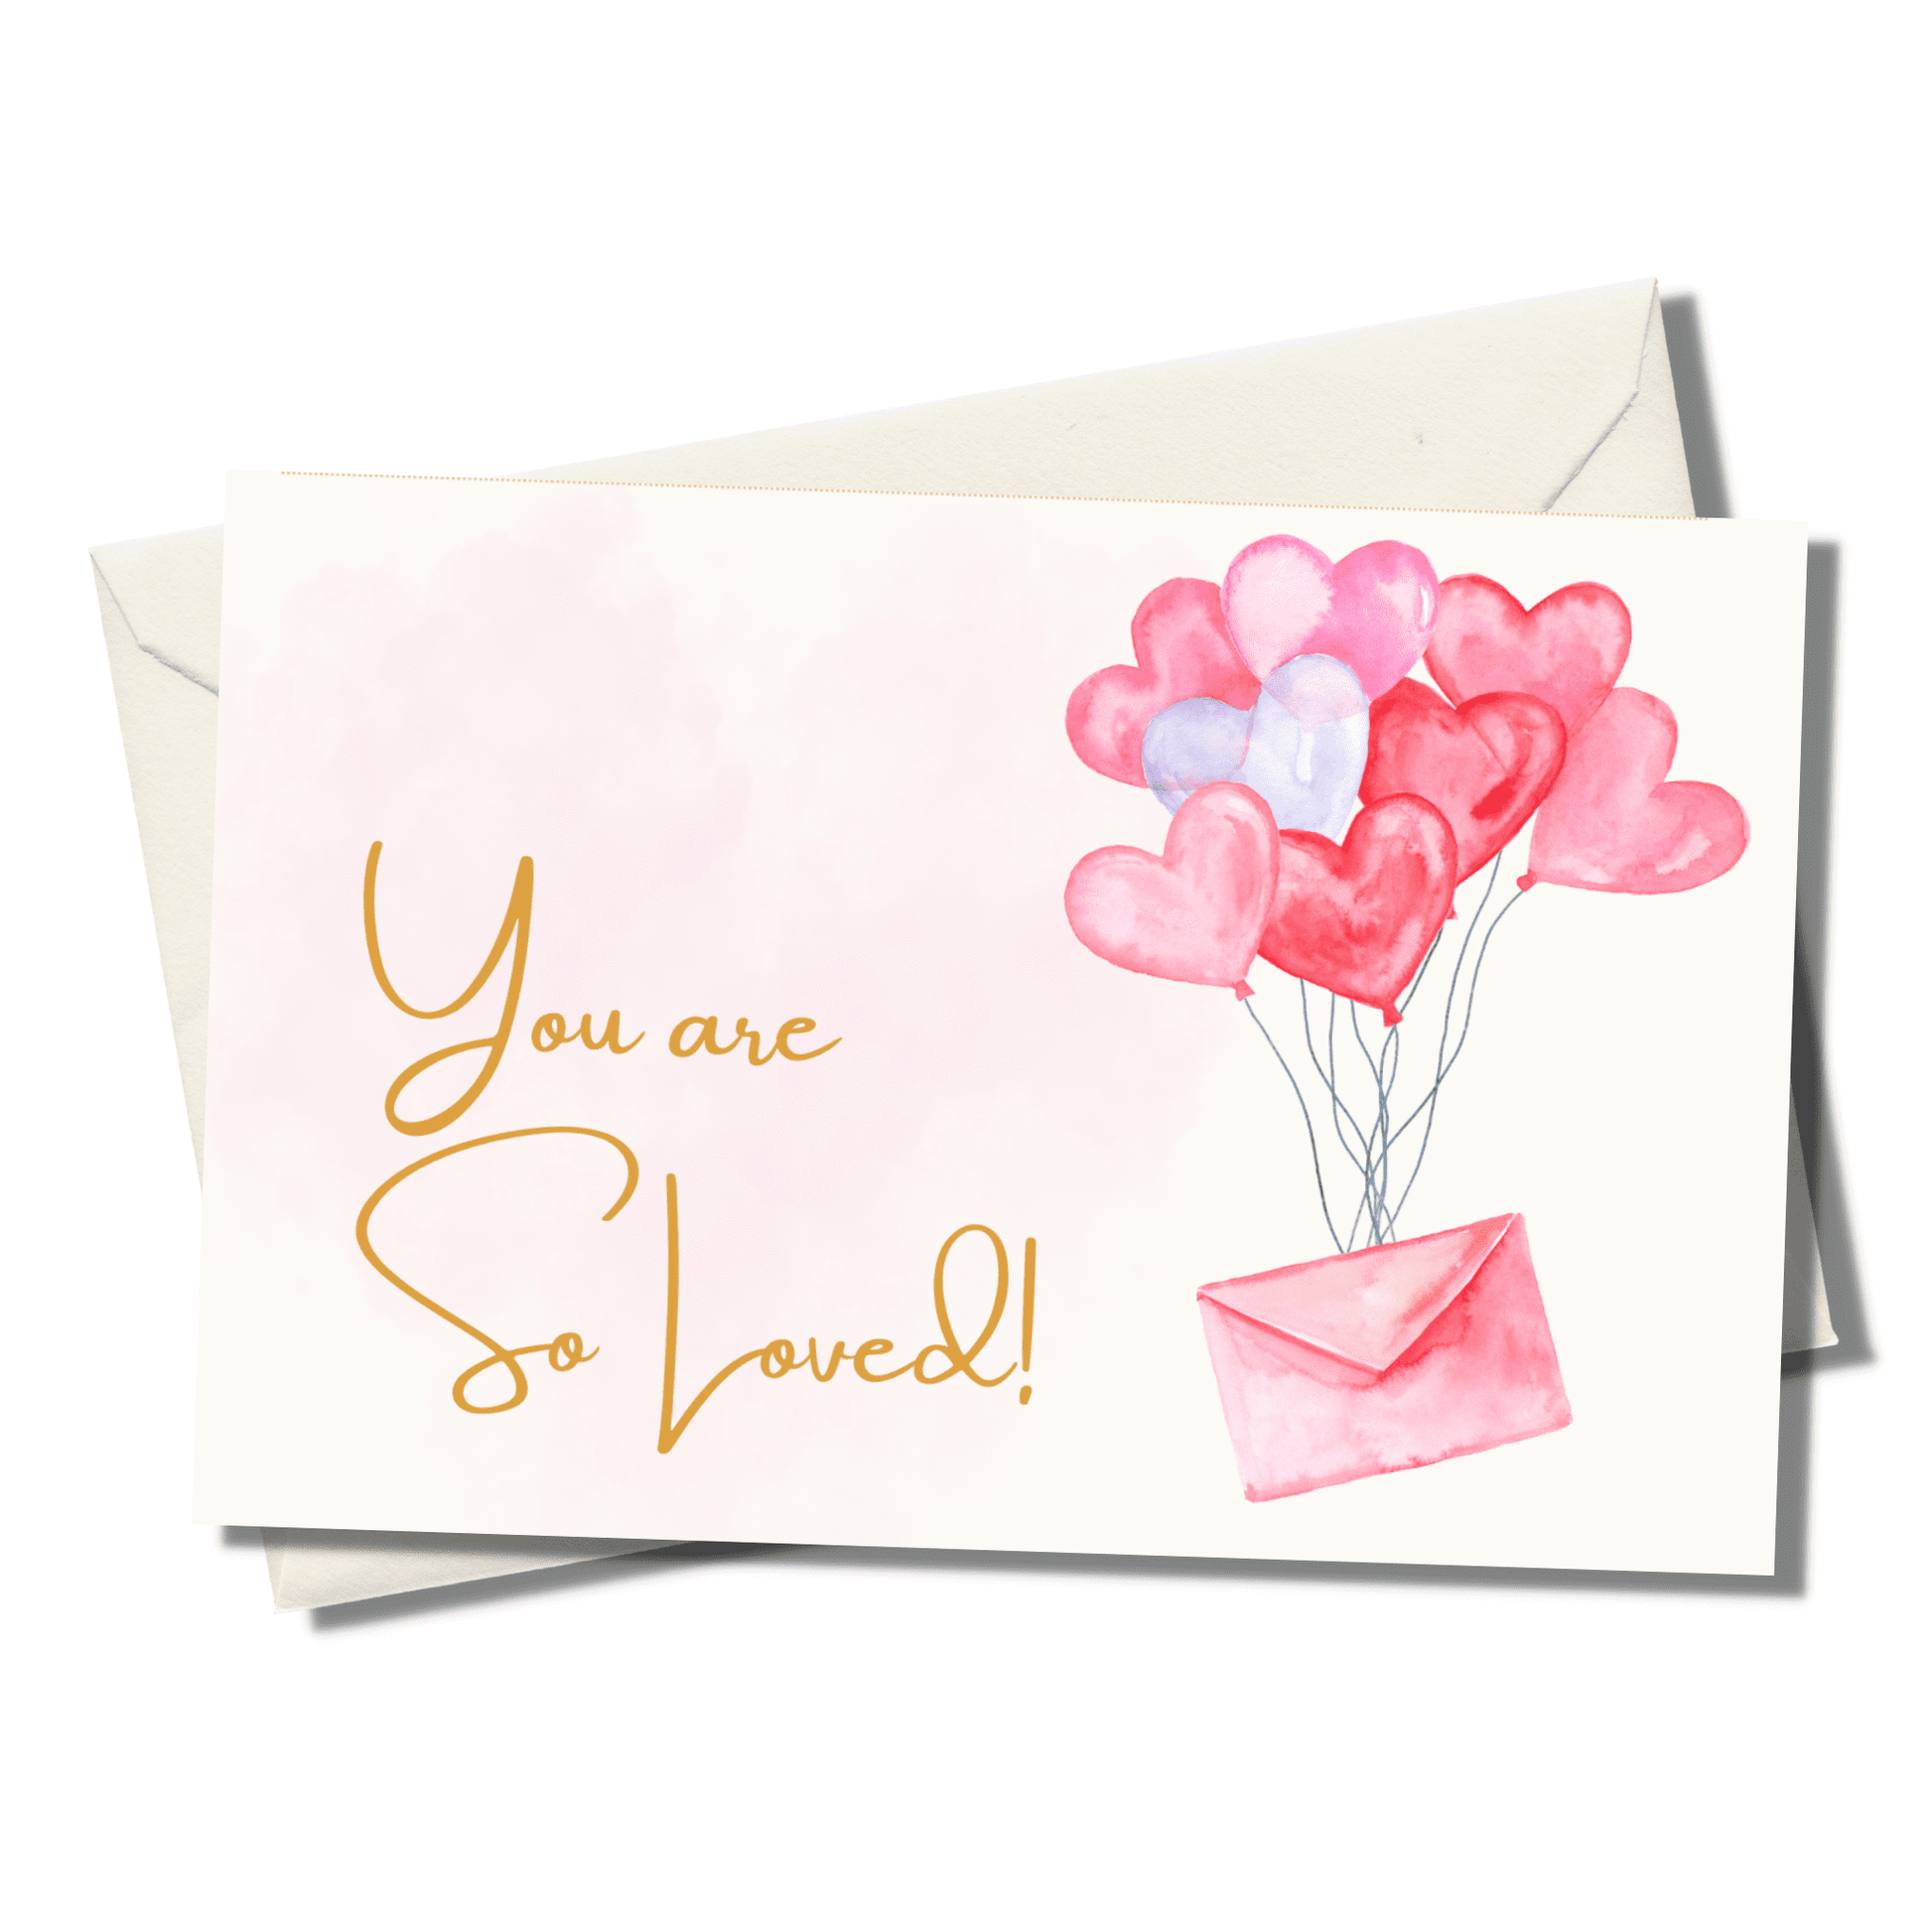 "You are so Loved!" Personalized Meditation Card